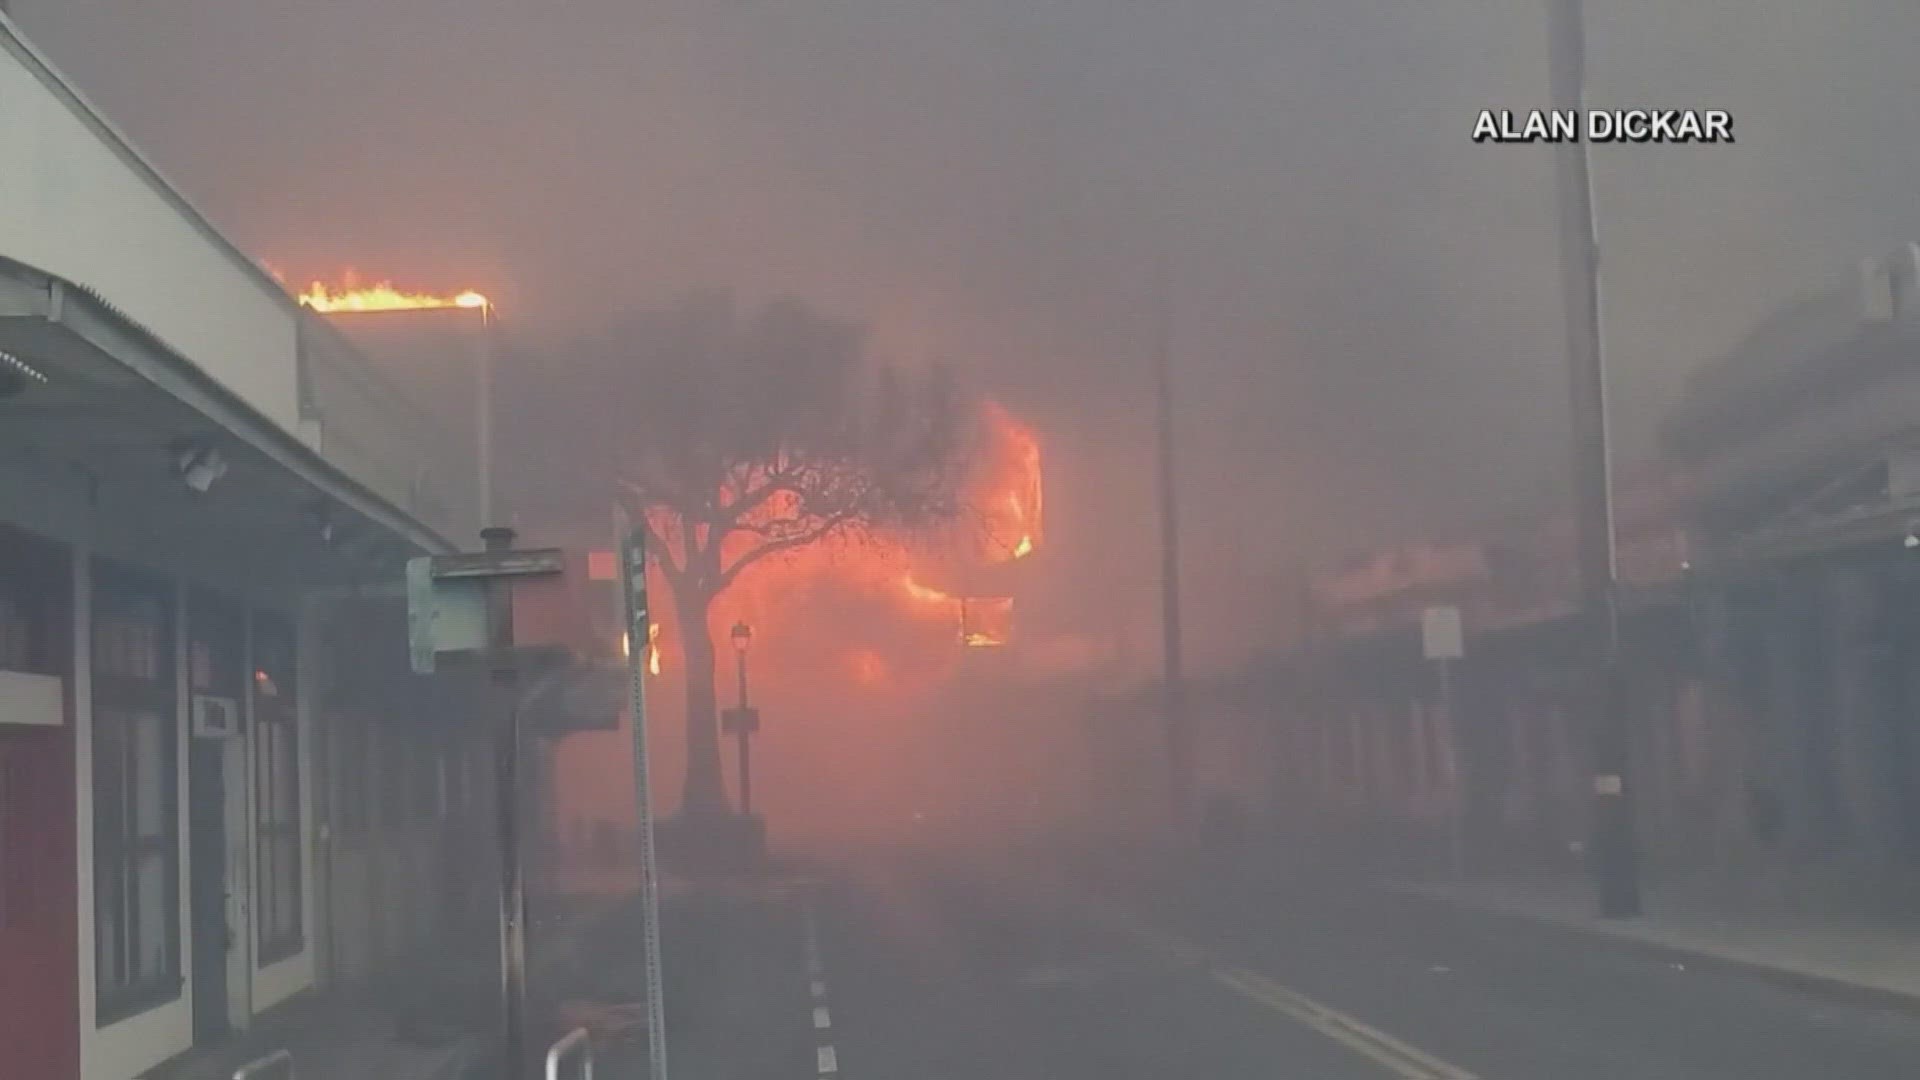 36 people have died in the devastating fires currently burning on the island.